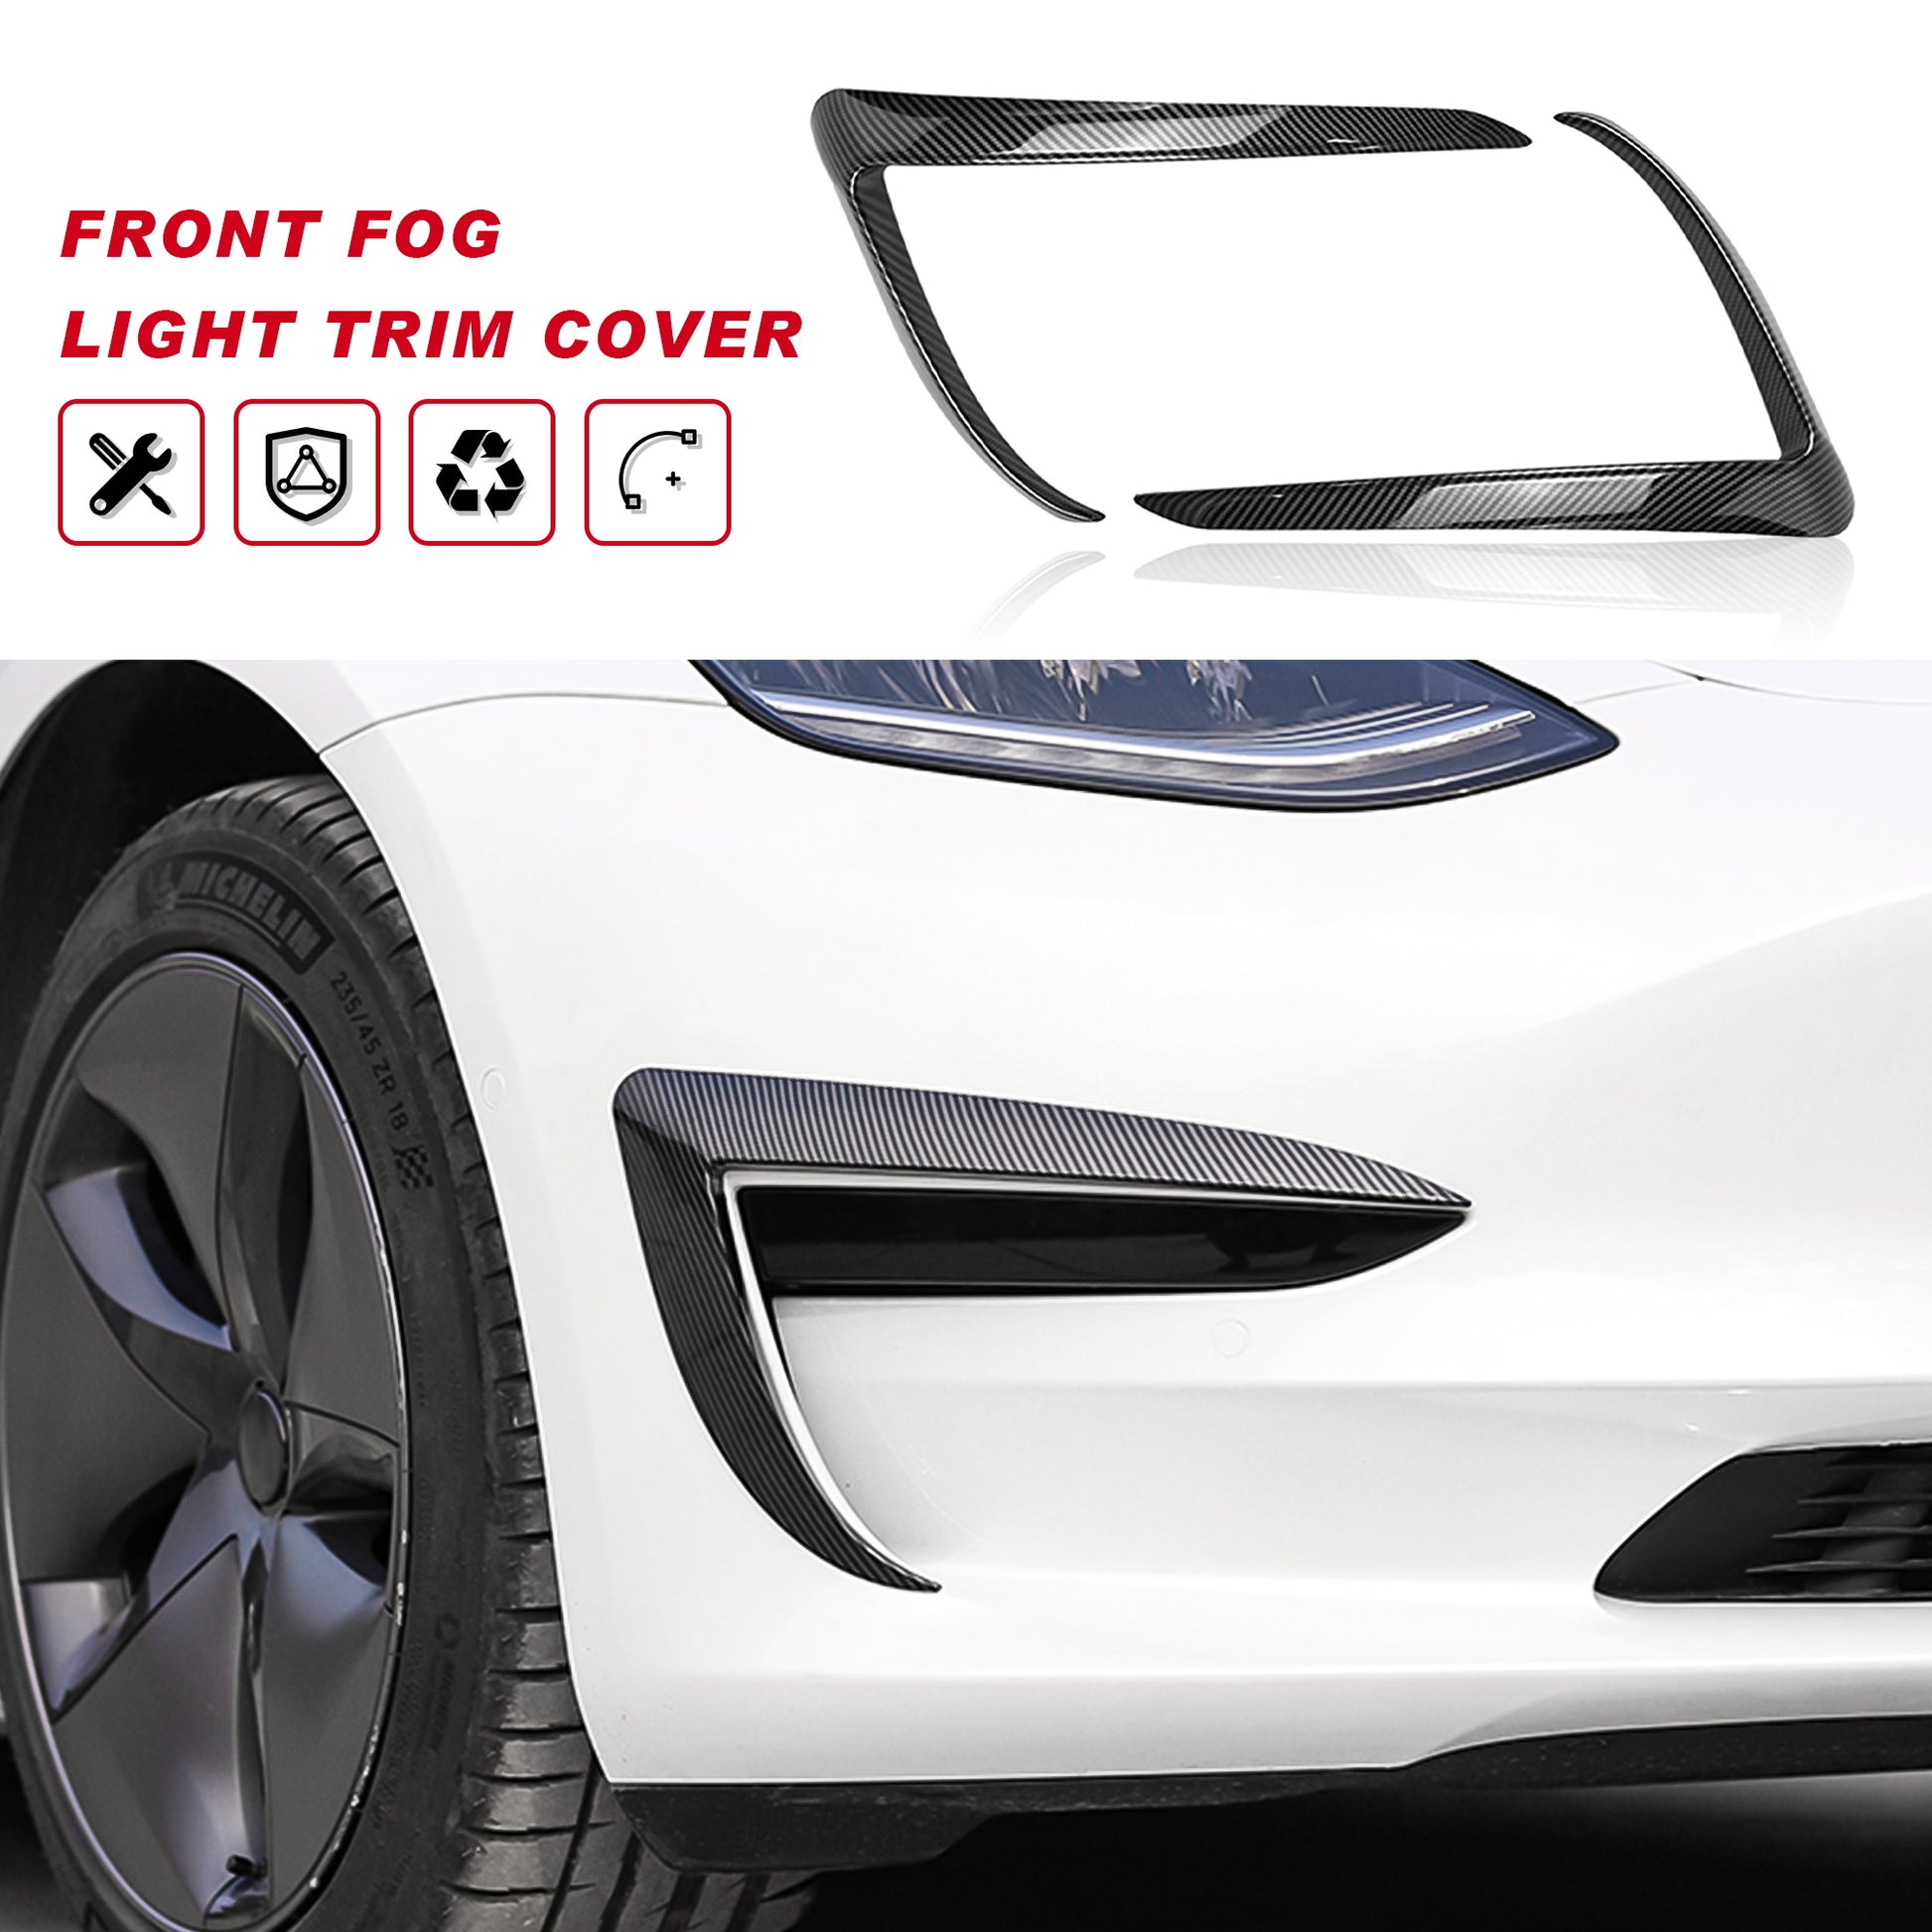 tesla model 3 front fog light trim cover covers lamp frame blade car 2022 2023 2021 2020 2019 2018 s3xy arcoche accessories accessory aftermarket price Vehicles standard long range performance sr+ electric car rwd ev interior exterior diy decoration price elon musk must have black white red blue 5 7 seats seat